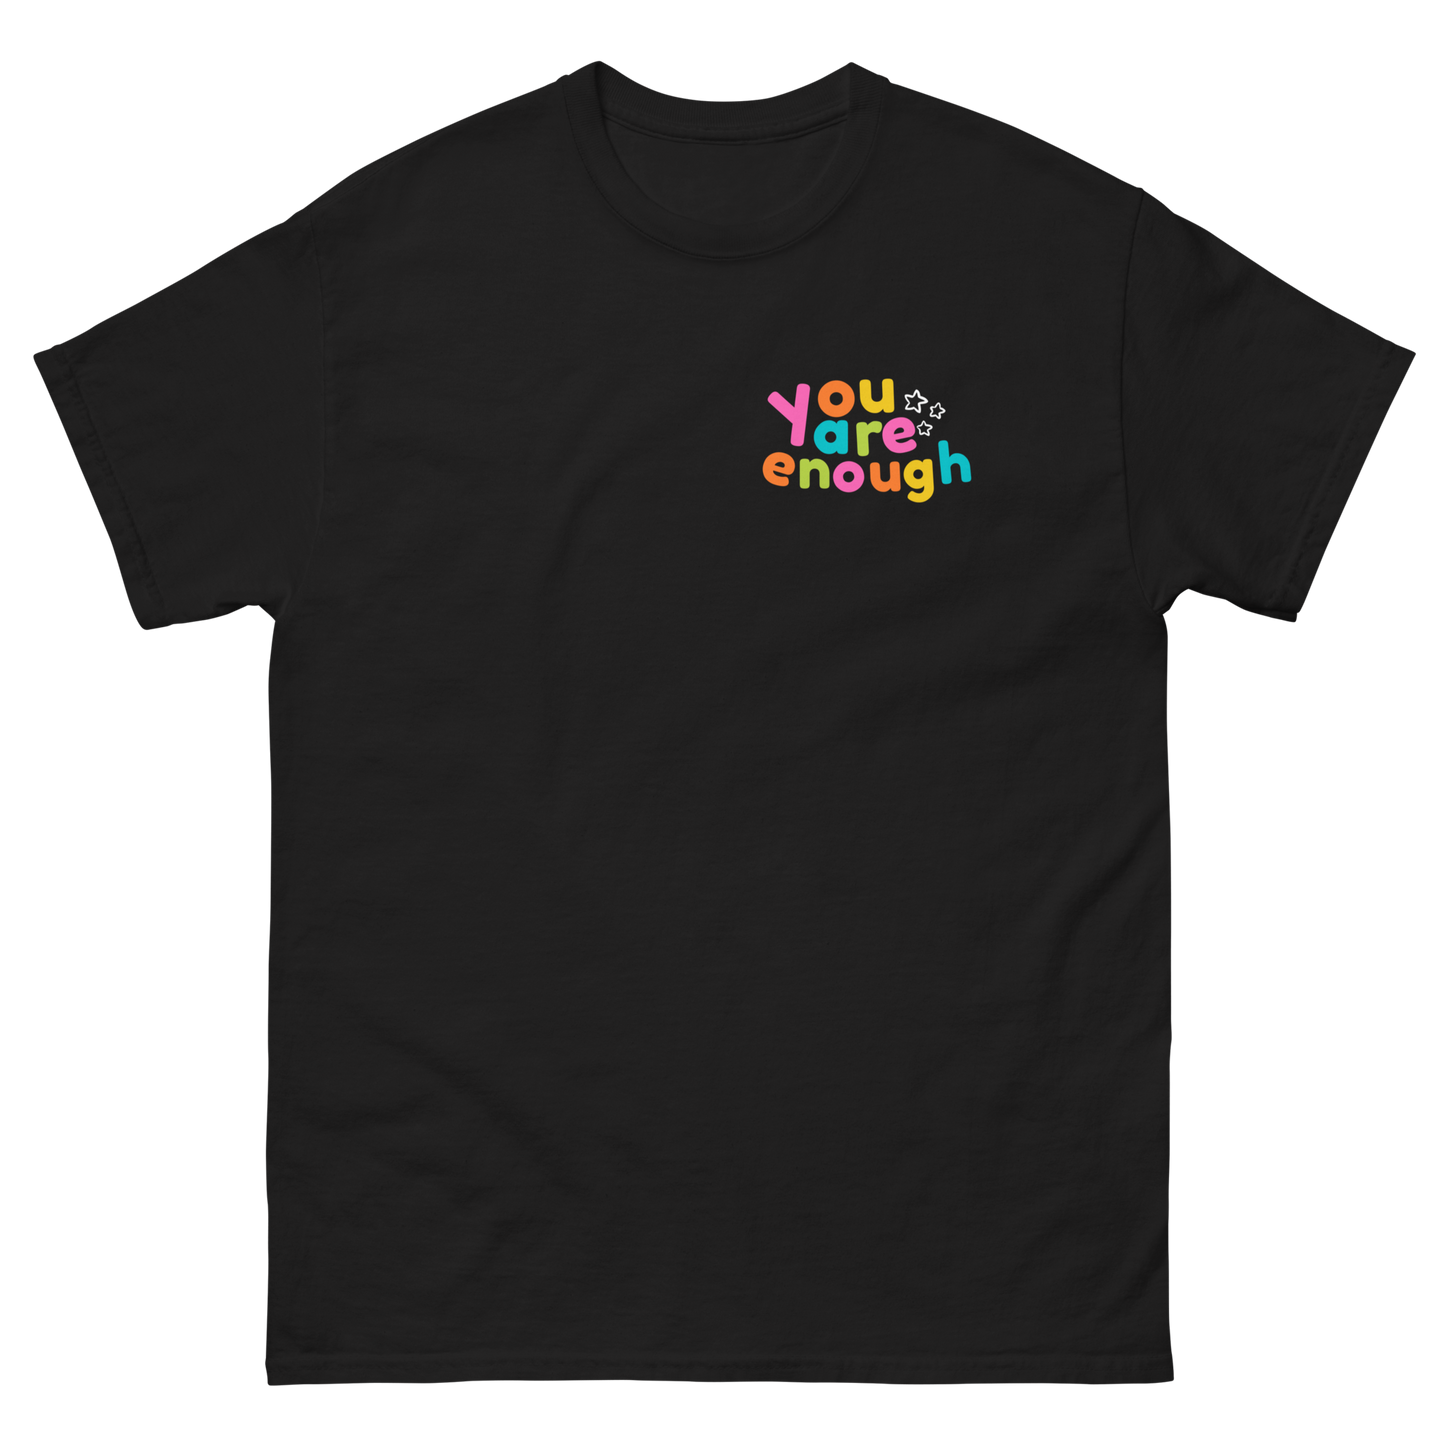 HM Students for Change x You Are Company T-Shirt